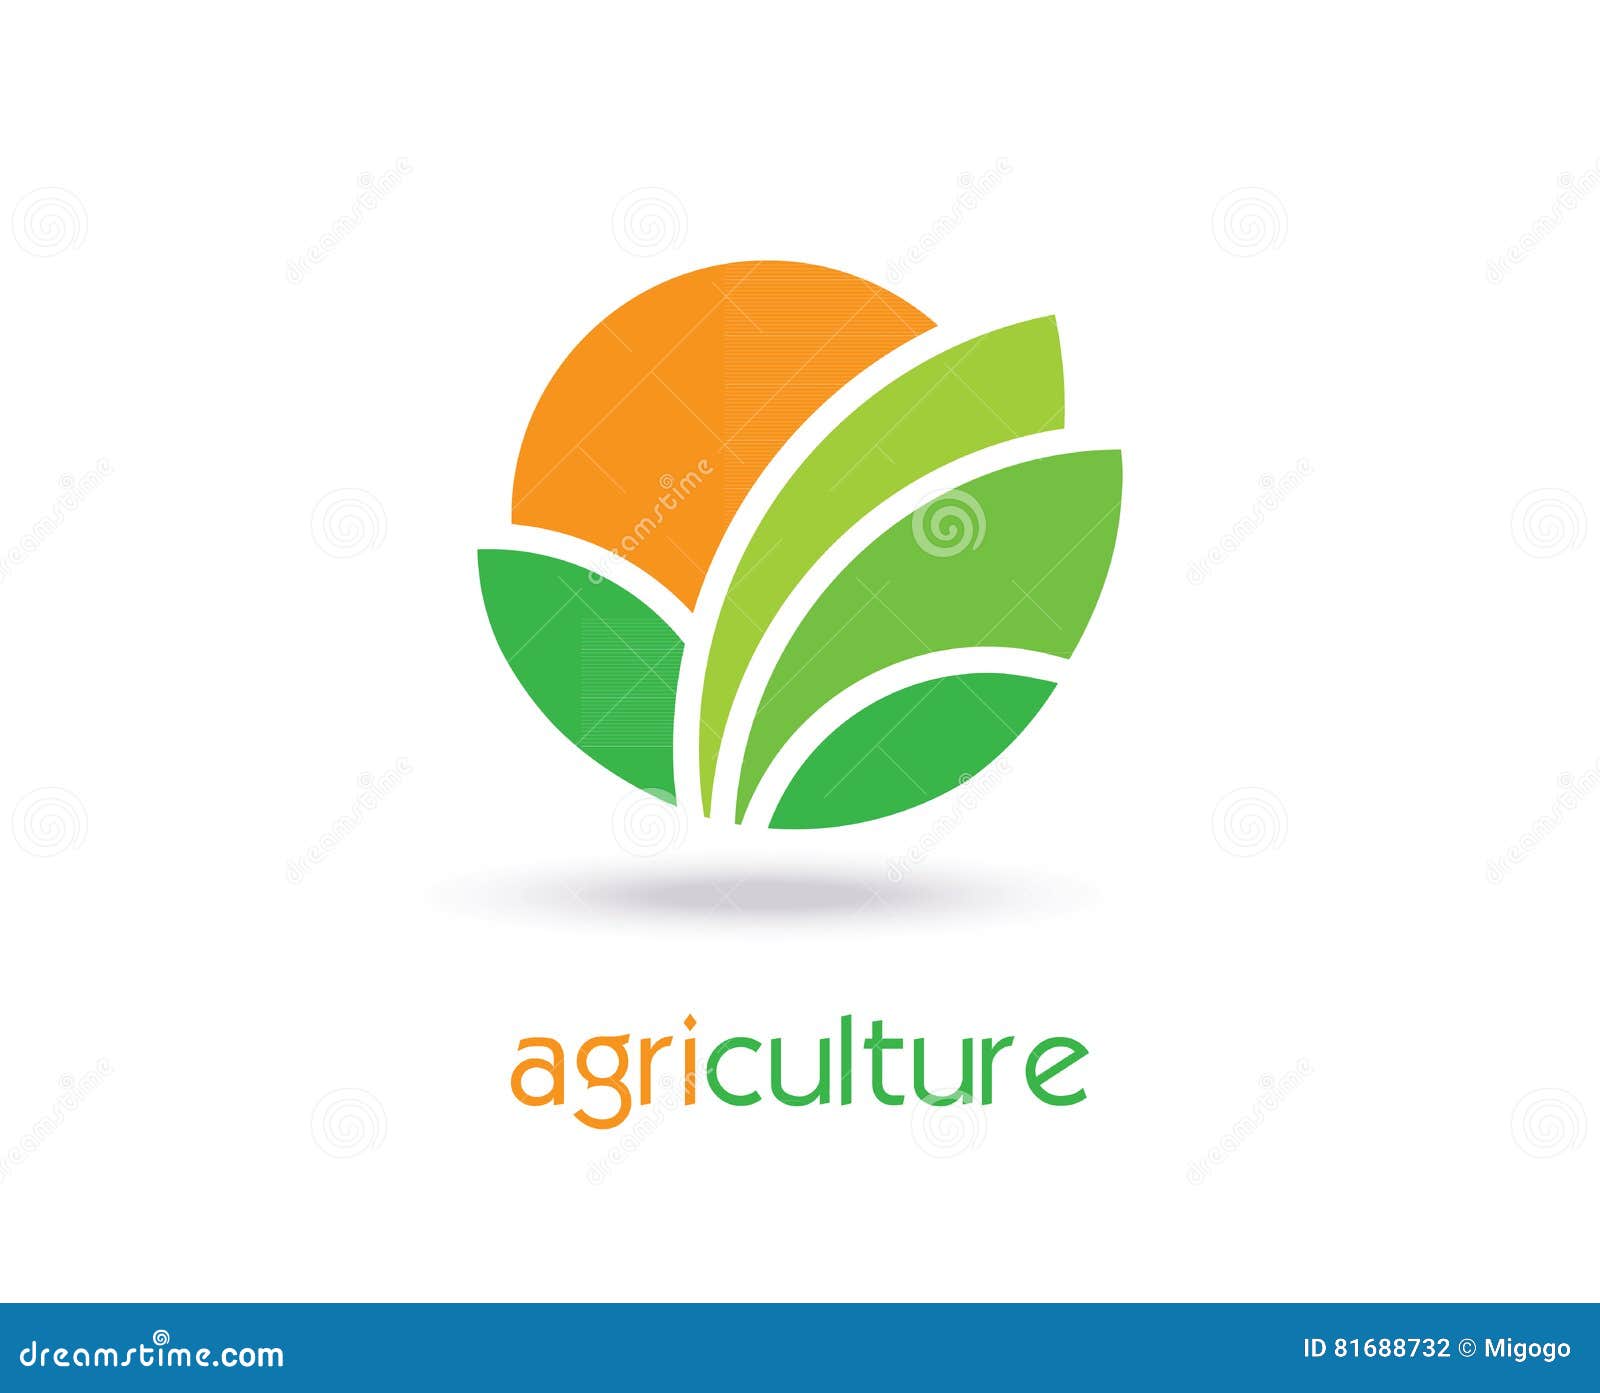 agriculture logo template . icon, sign or .